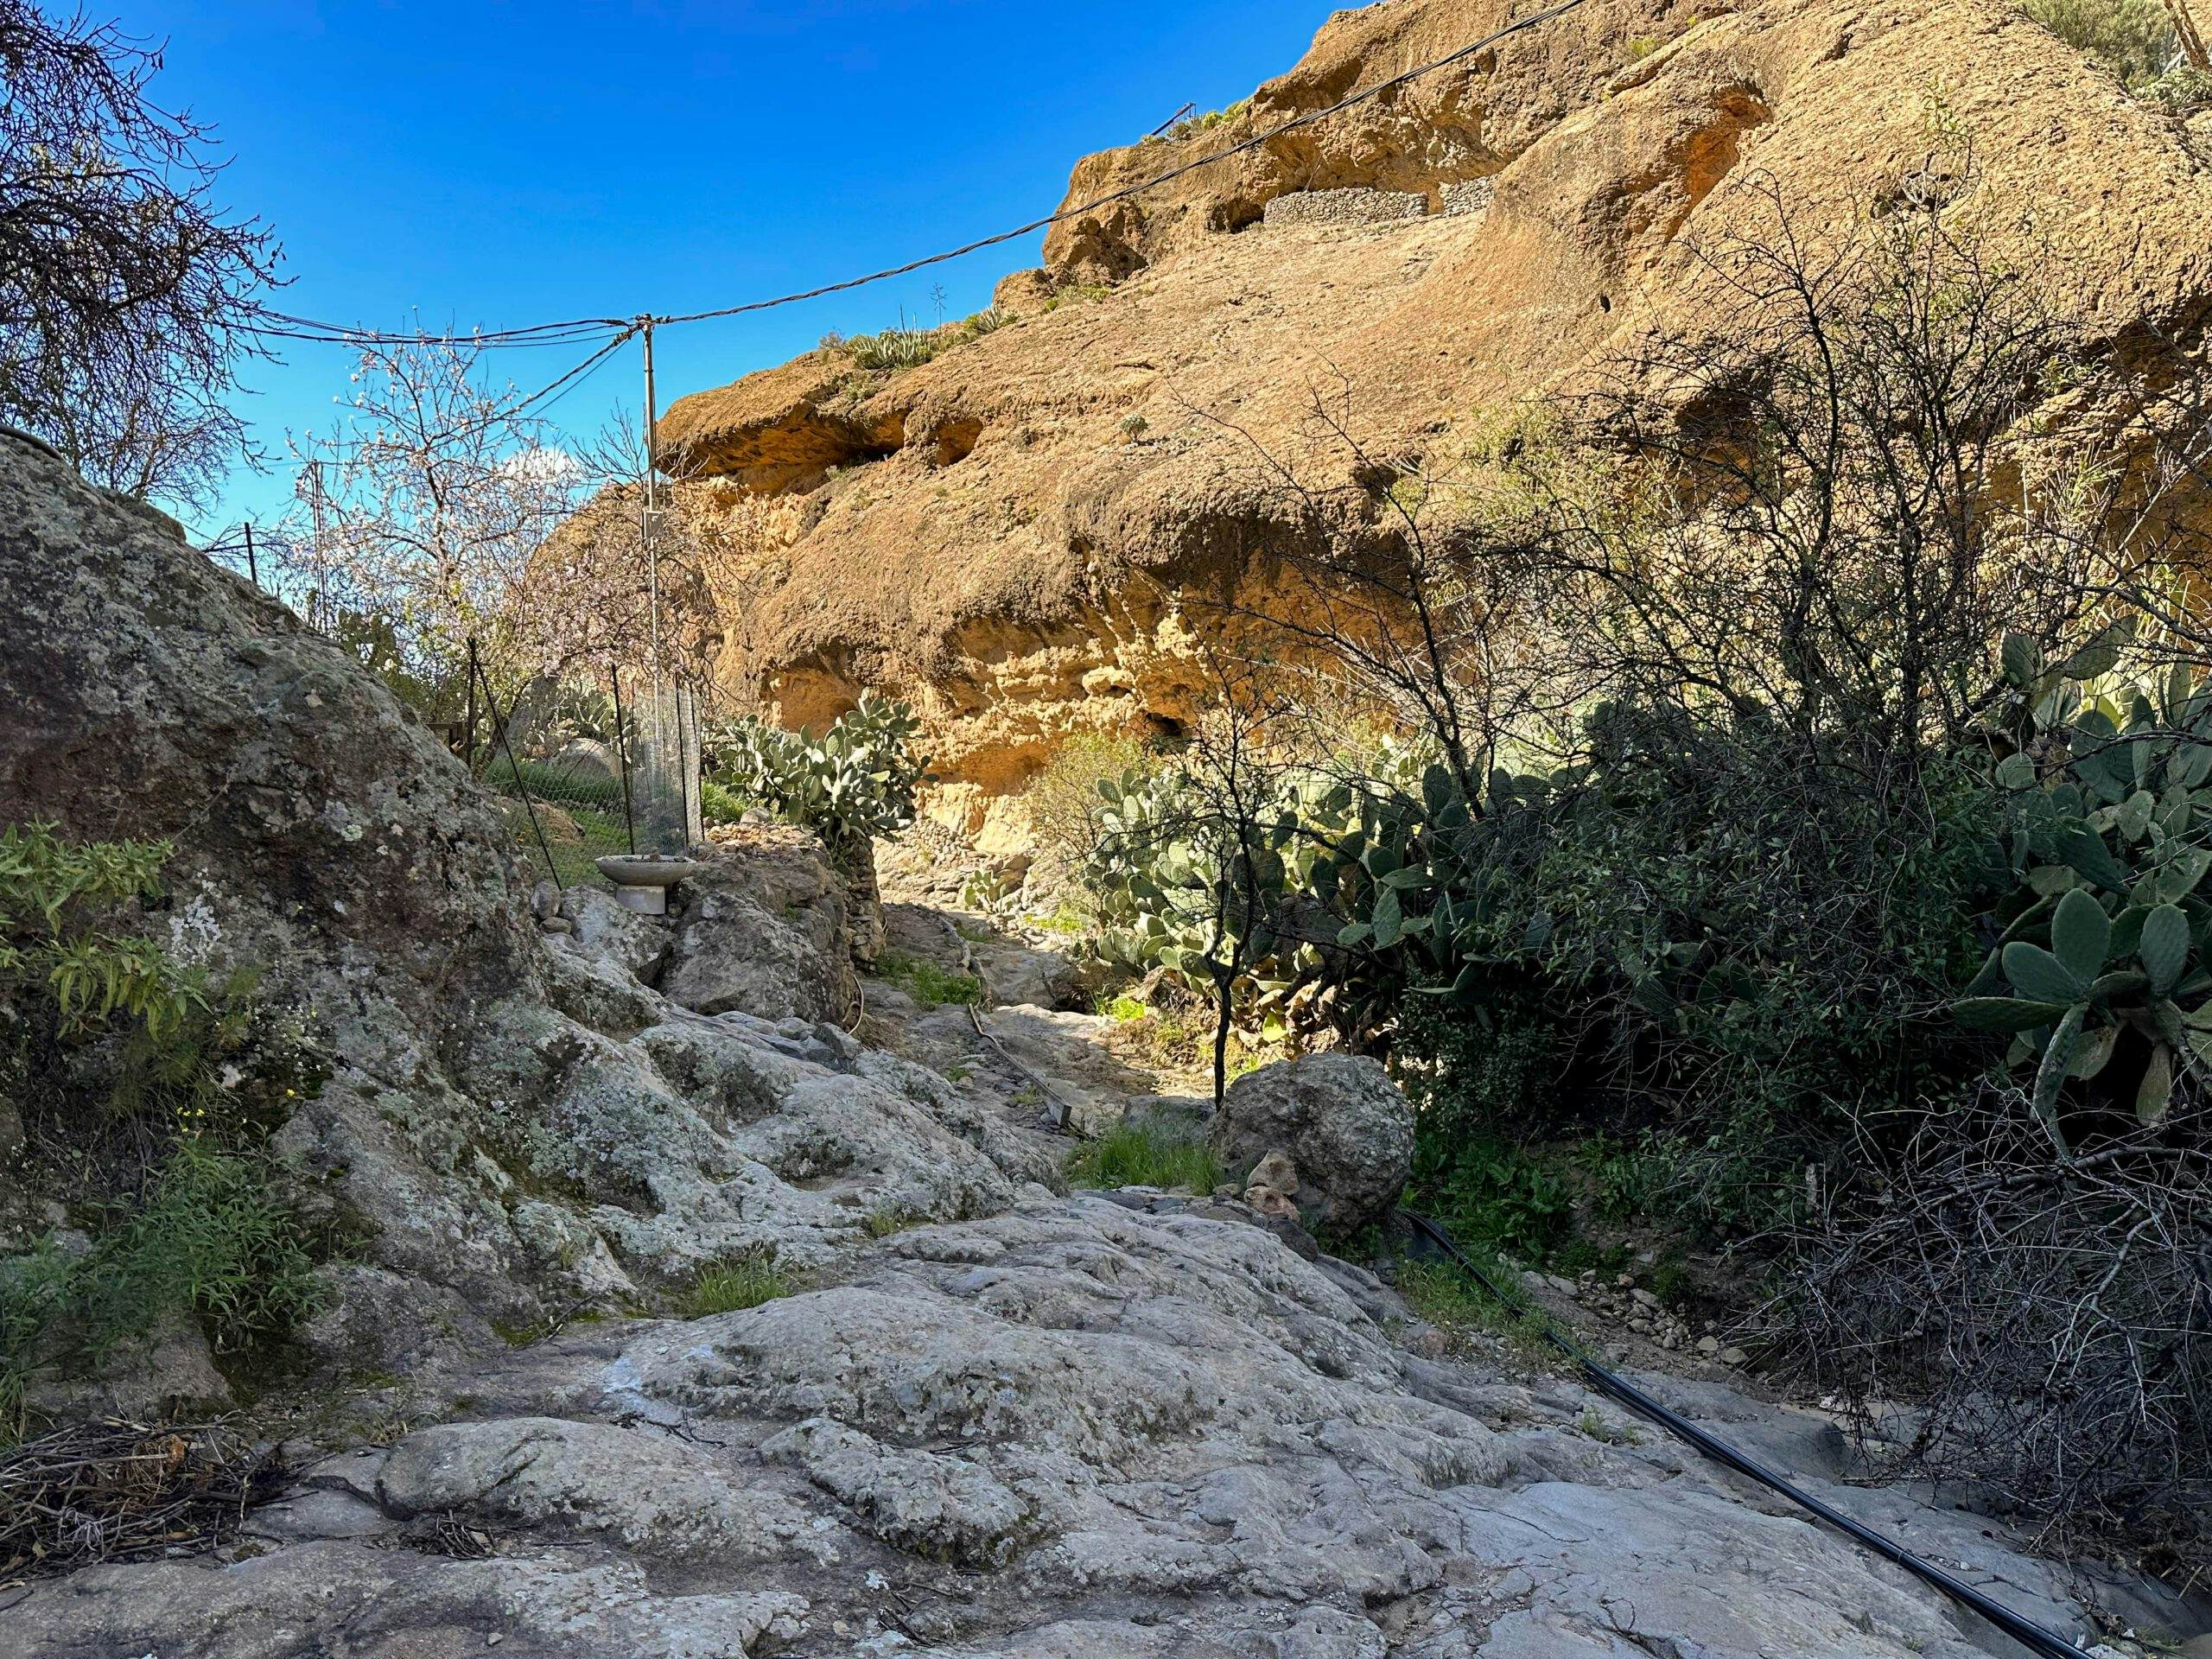 Hiking trail in Barranco Manantiales over rocks